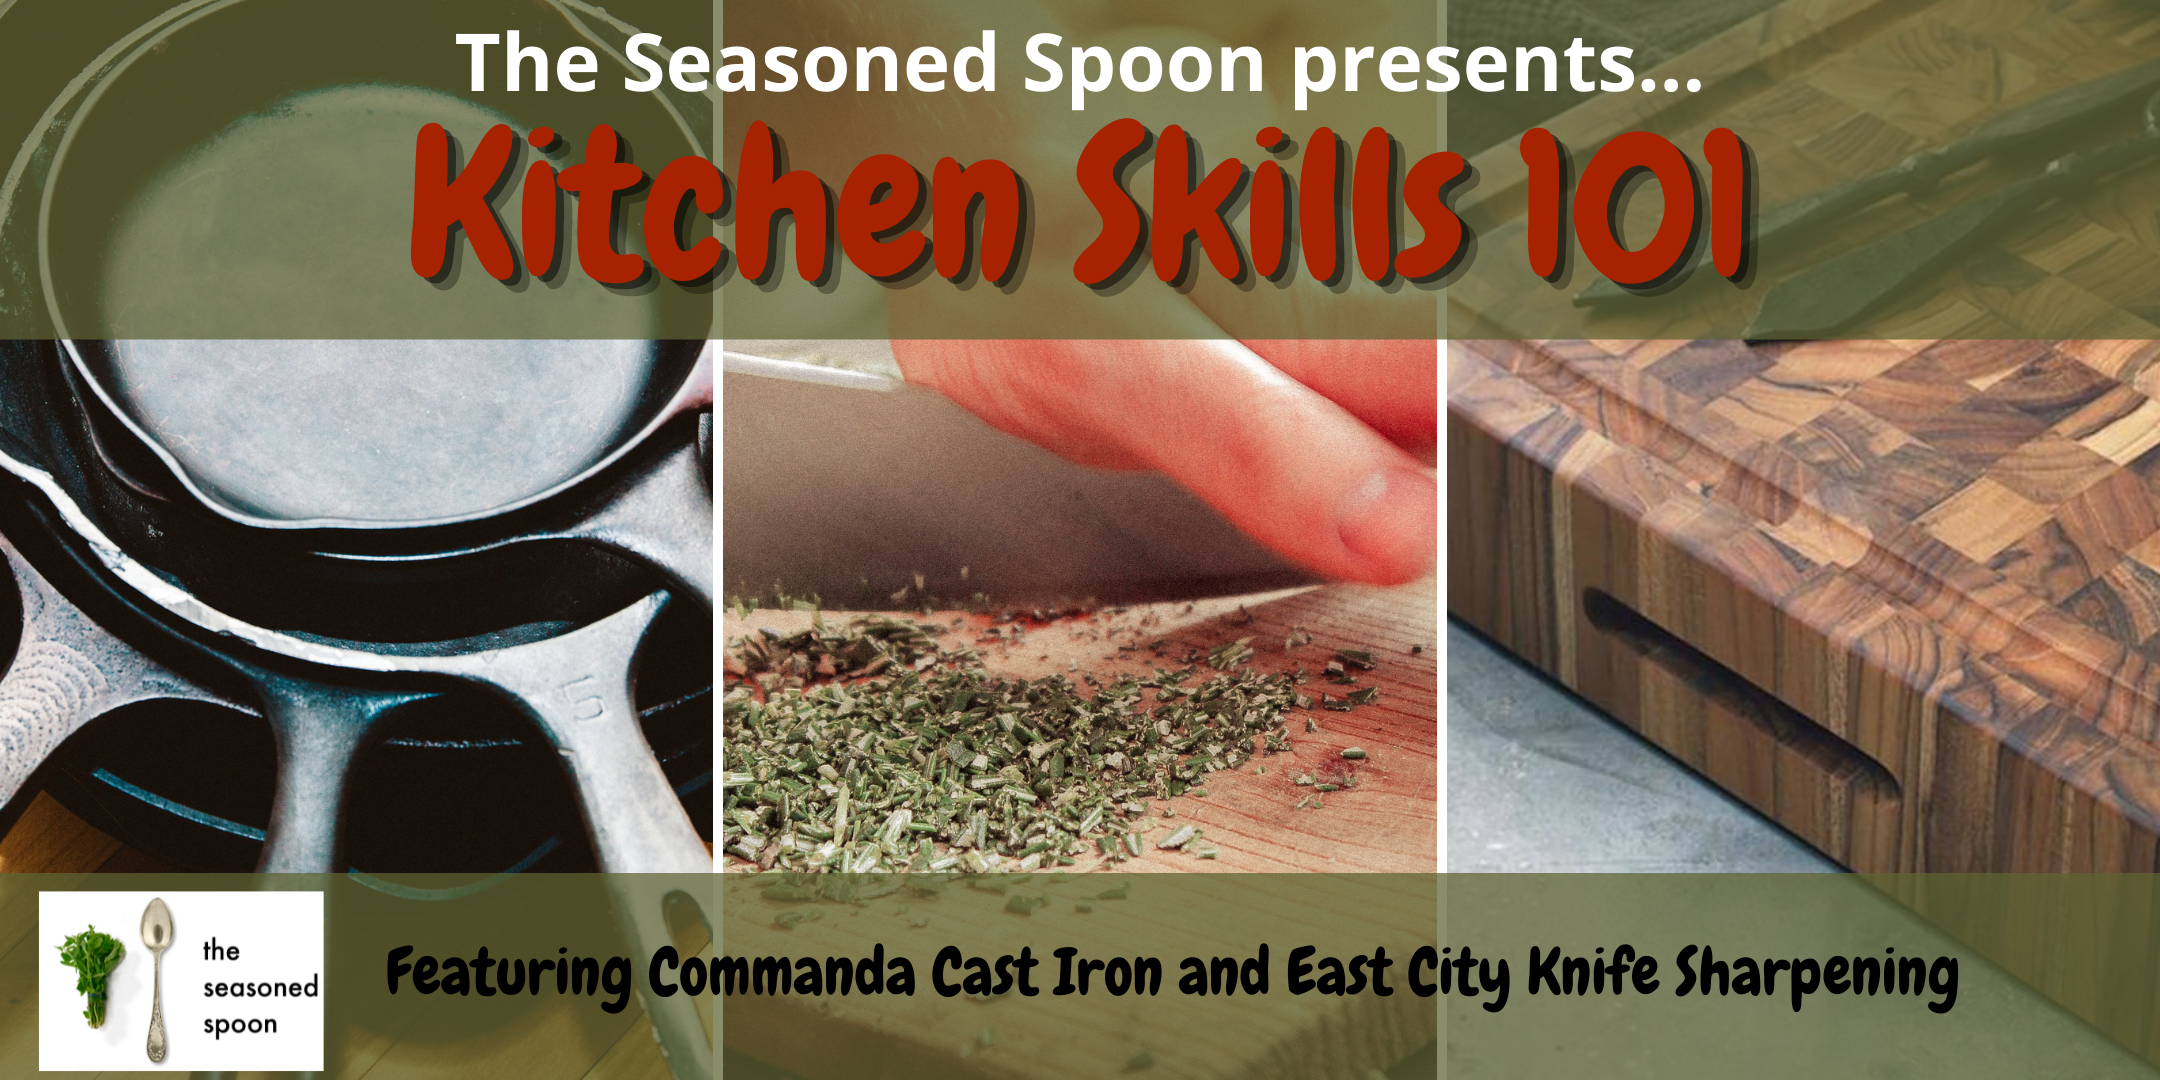 Three images in a grid going horizontally, from left to right; a stack of cast iron pans, hand holding a knife chopping various herbs, and two wooden cutting boards overlapping. Olive green header at the top of the grid states, "The Seasoned Spoon presents... Kitchen Skills 101" and a bottom header (same olive green) has the Seasoned Spoon logo on the left, and reads "Featuring Commanda Cast Iron and East City Knife Sharpening."